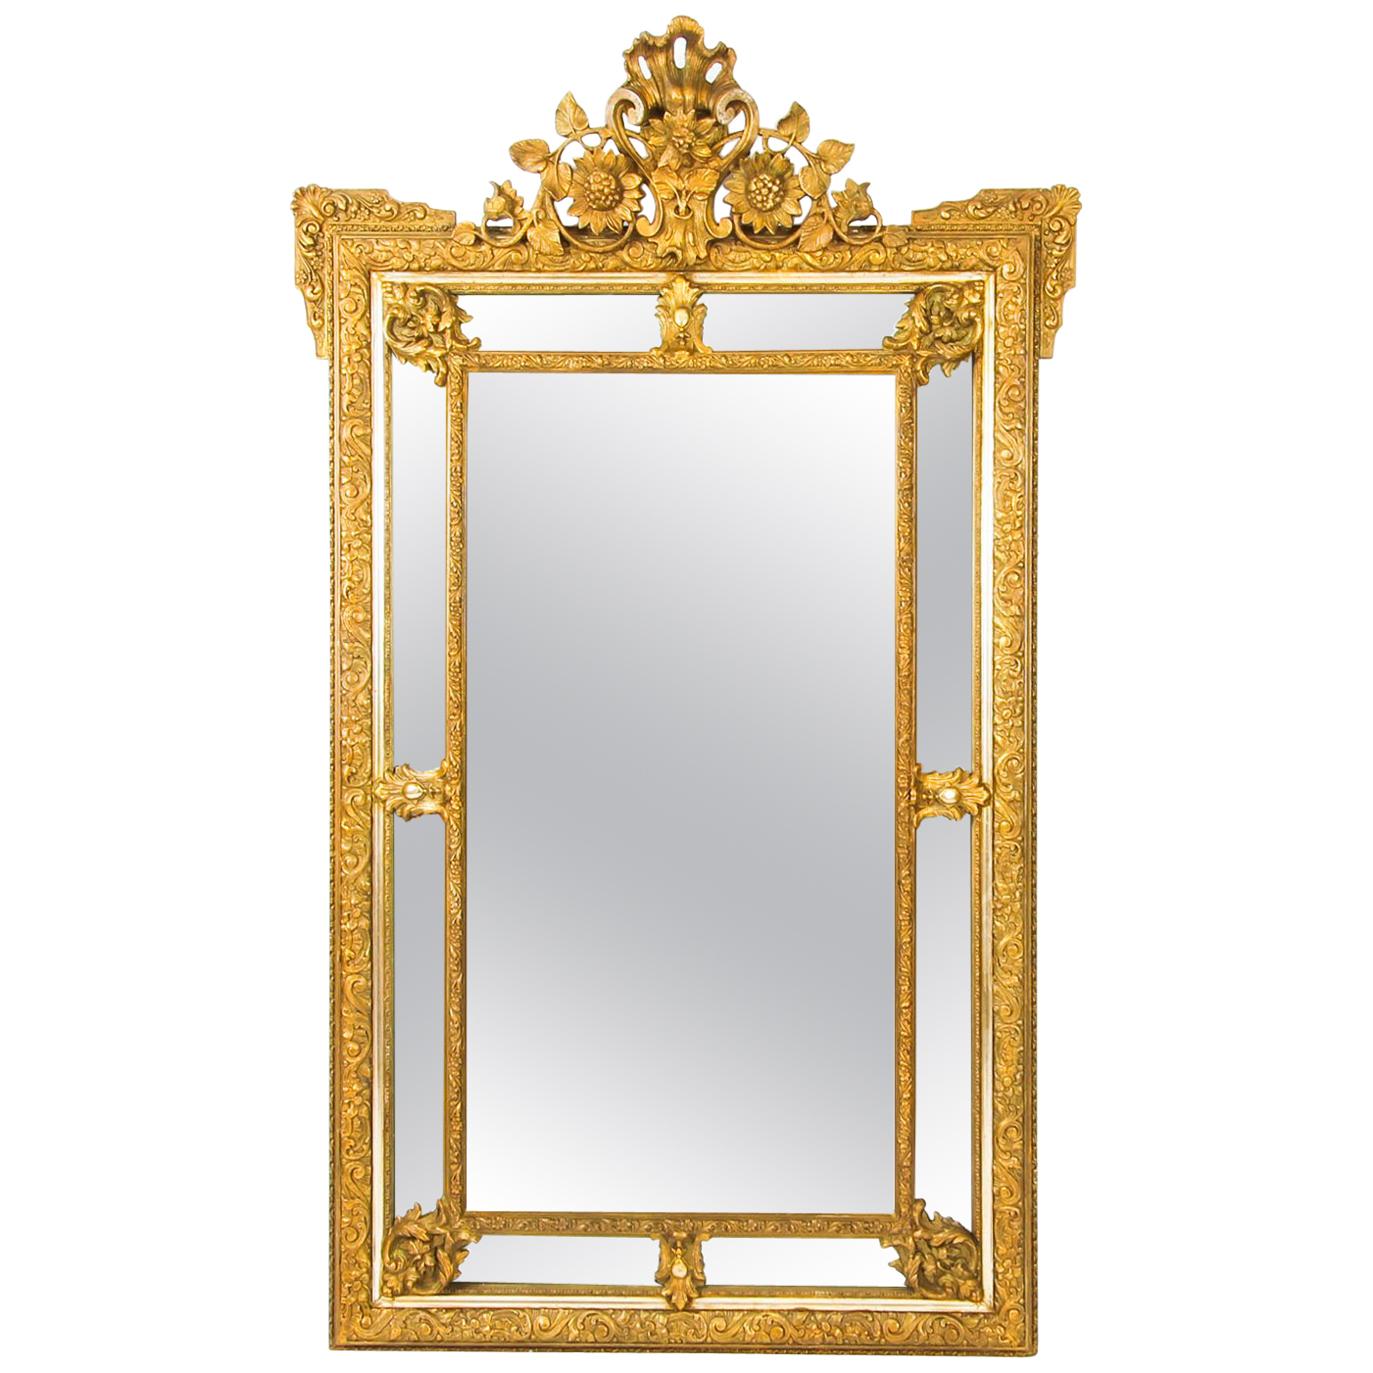 Antique French Giltwood Overmantel Louis Revival Mirror, 19th Century For Sale